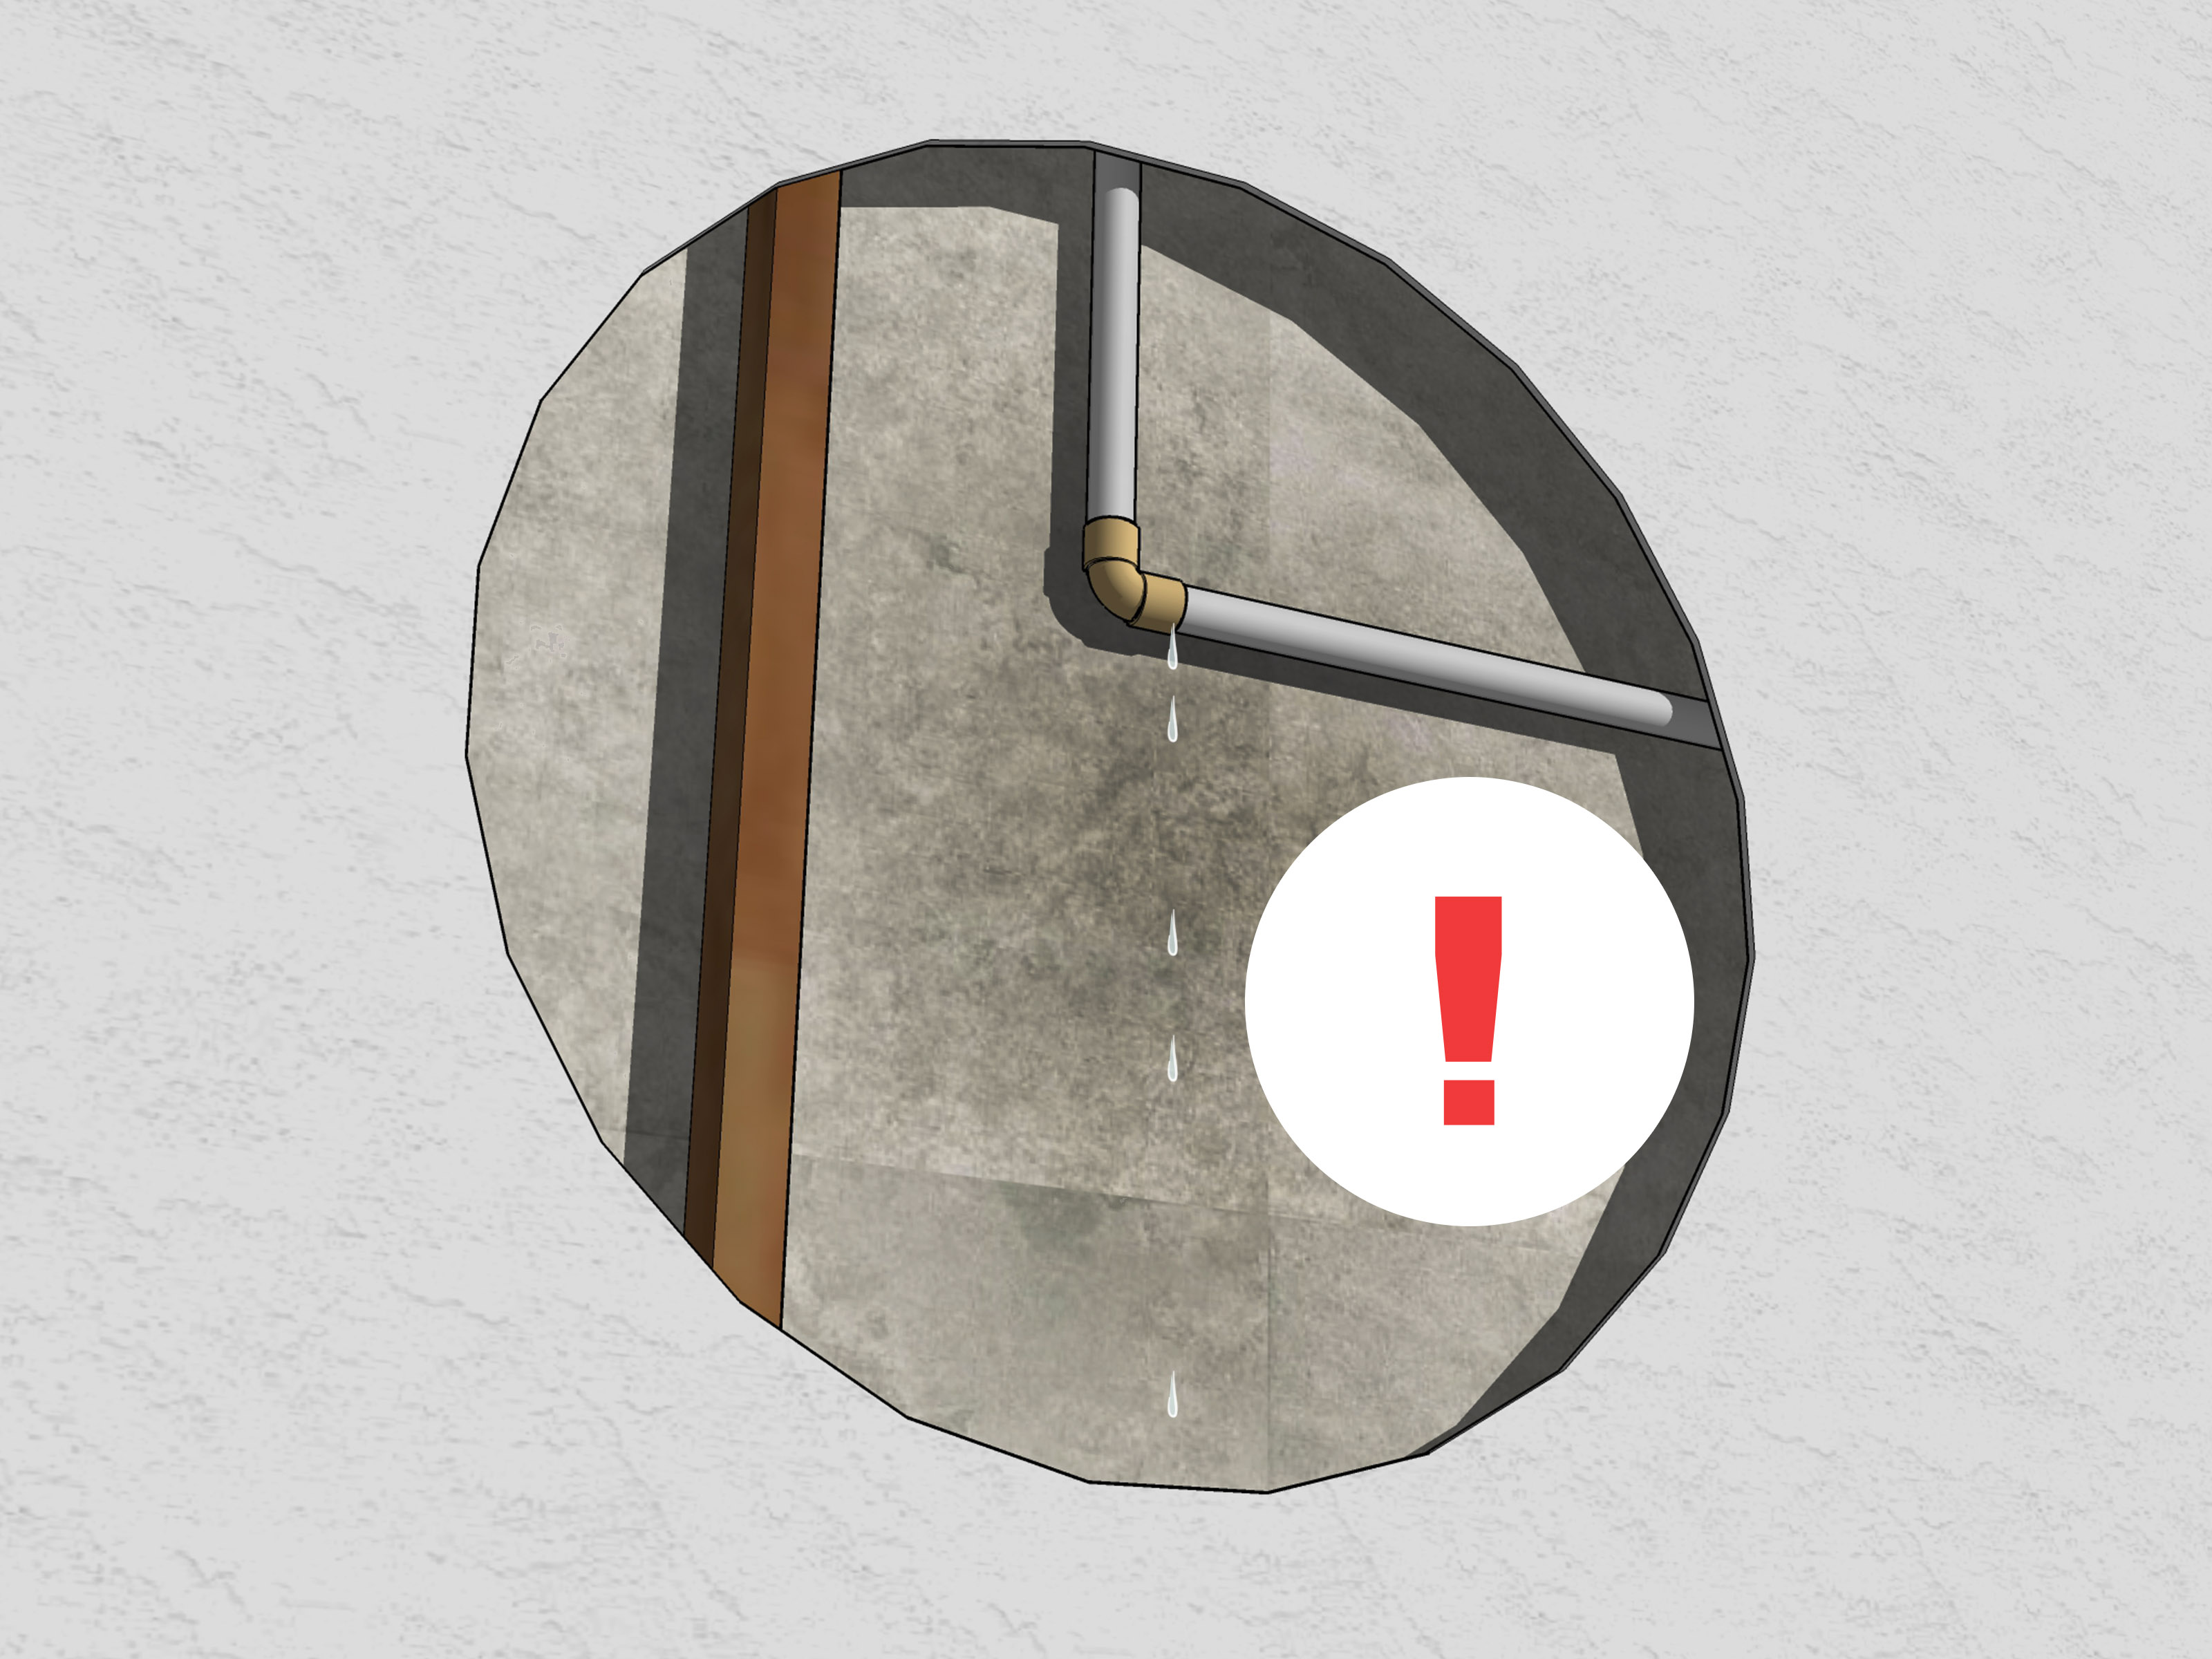 Image Titled Detect Water Leaks In Walls Step - Circle - HD Wallpaper 